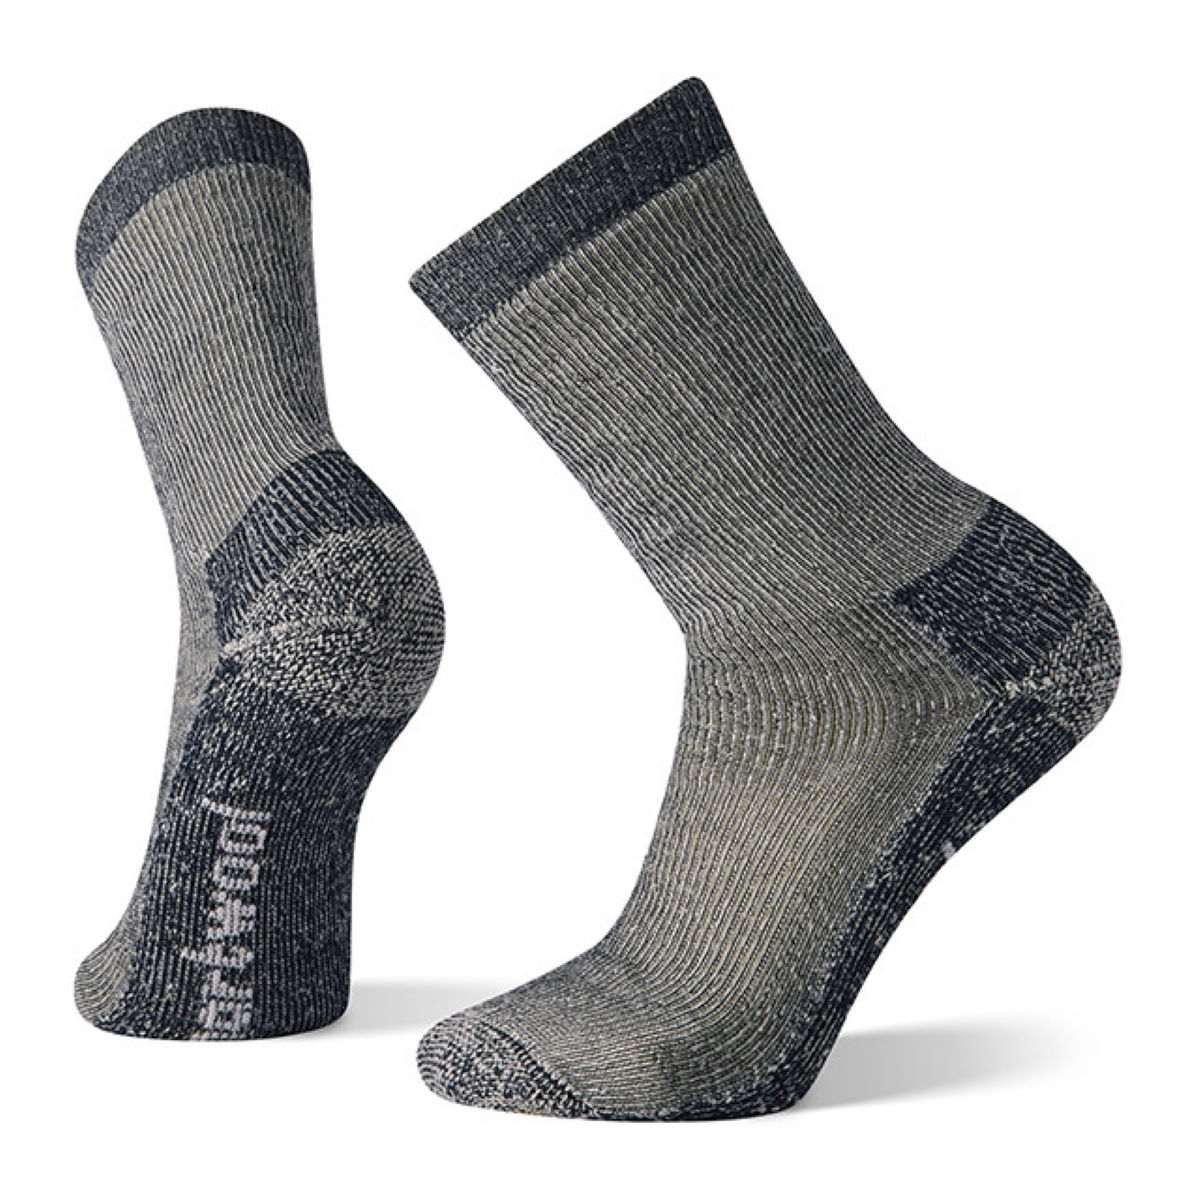 Calcetines deportivos Smartwool Classic Hike (con acolchamiento extra) - Calcetines